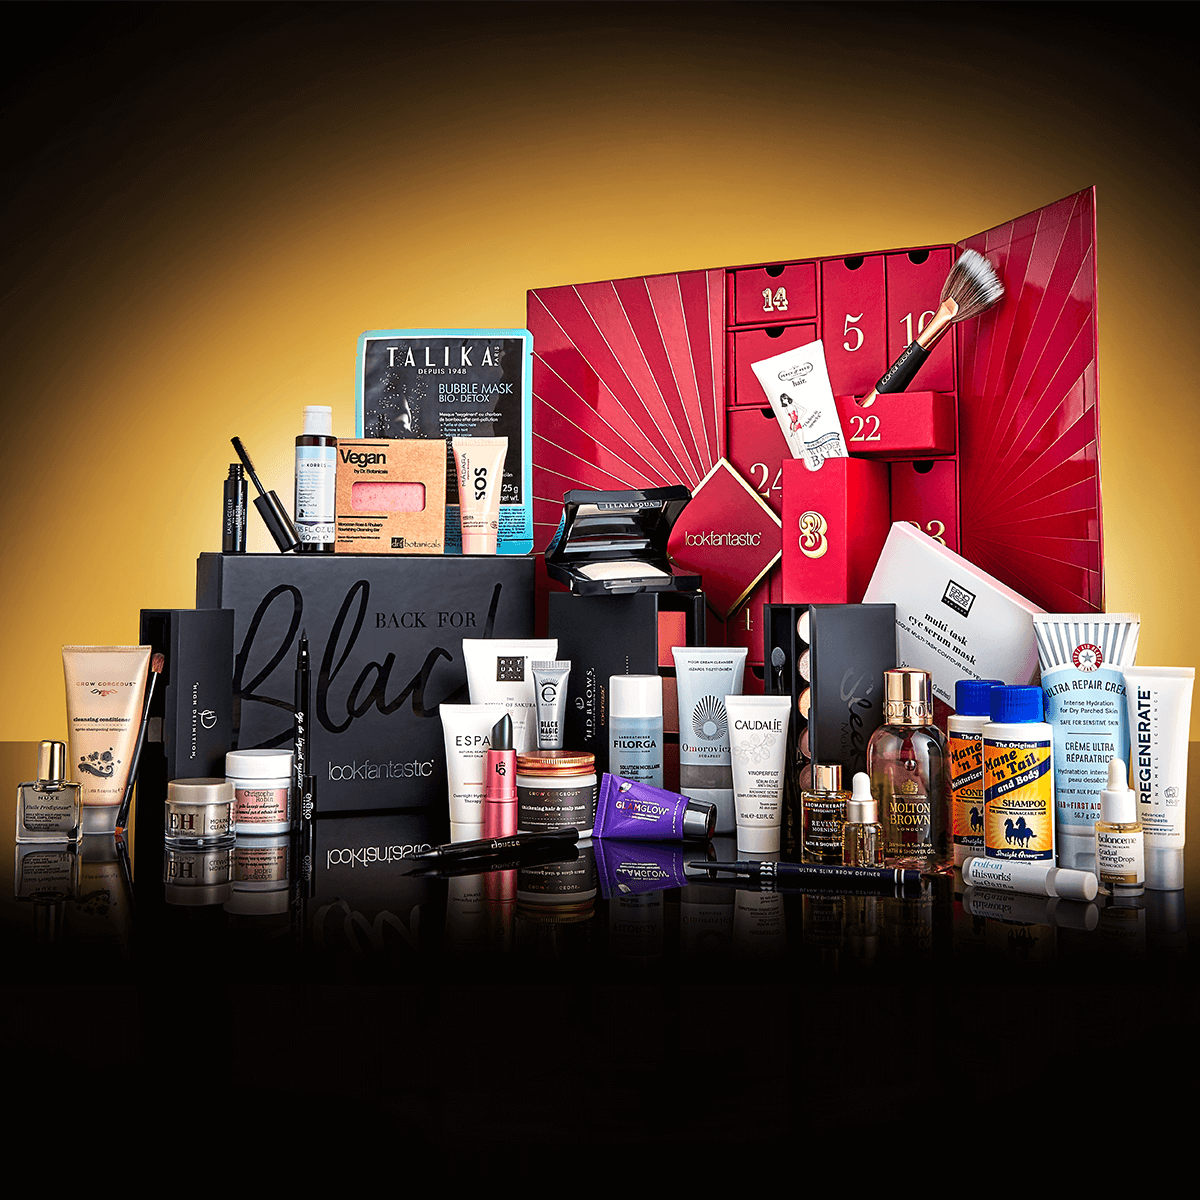 The Ultimate Black Friday Bundle - Advent Calendar & Back for Black Limited Edition Beauty Box